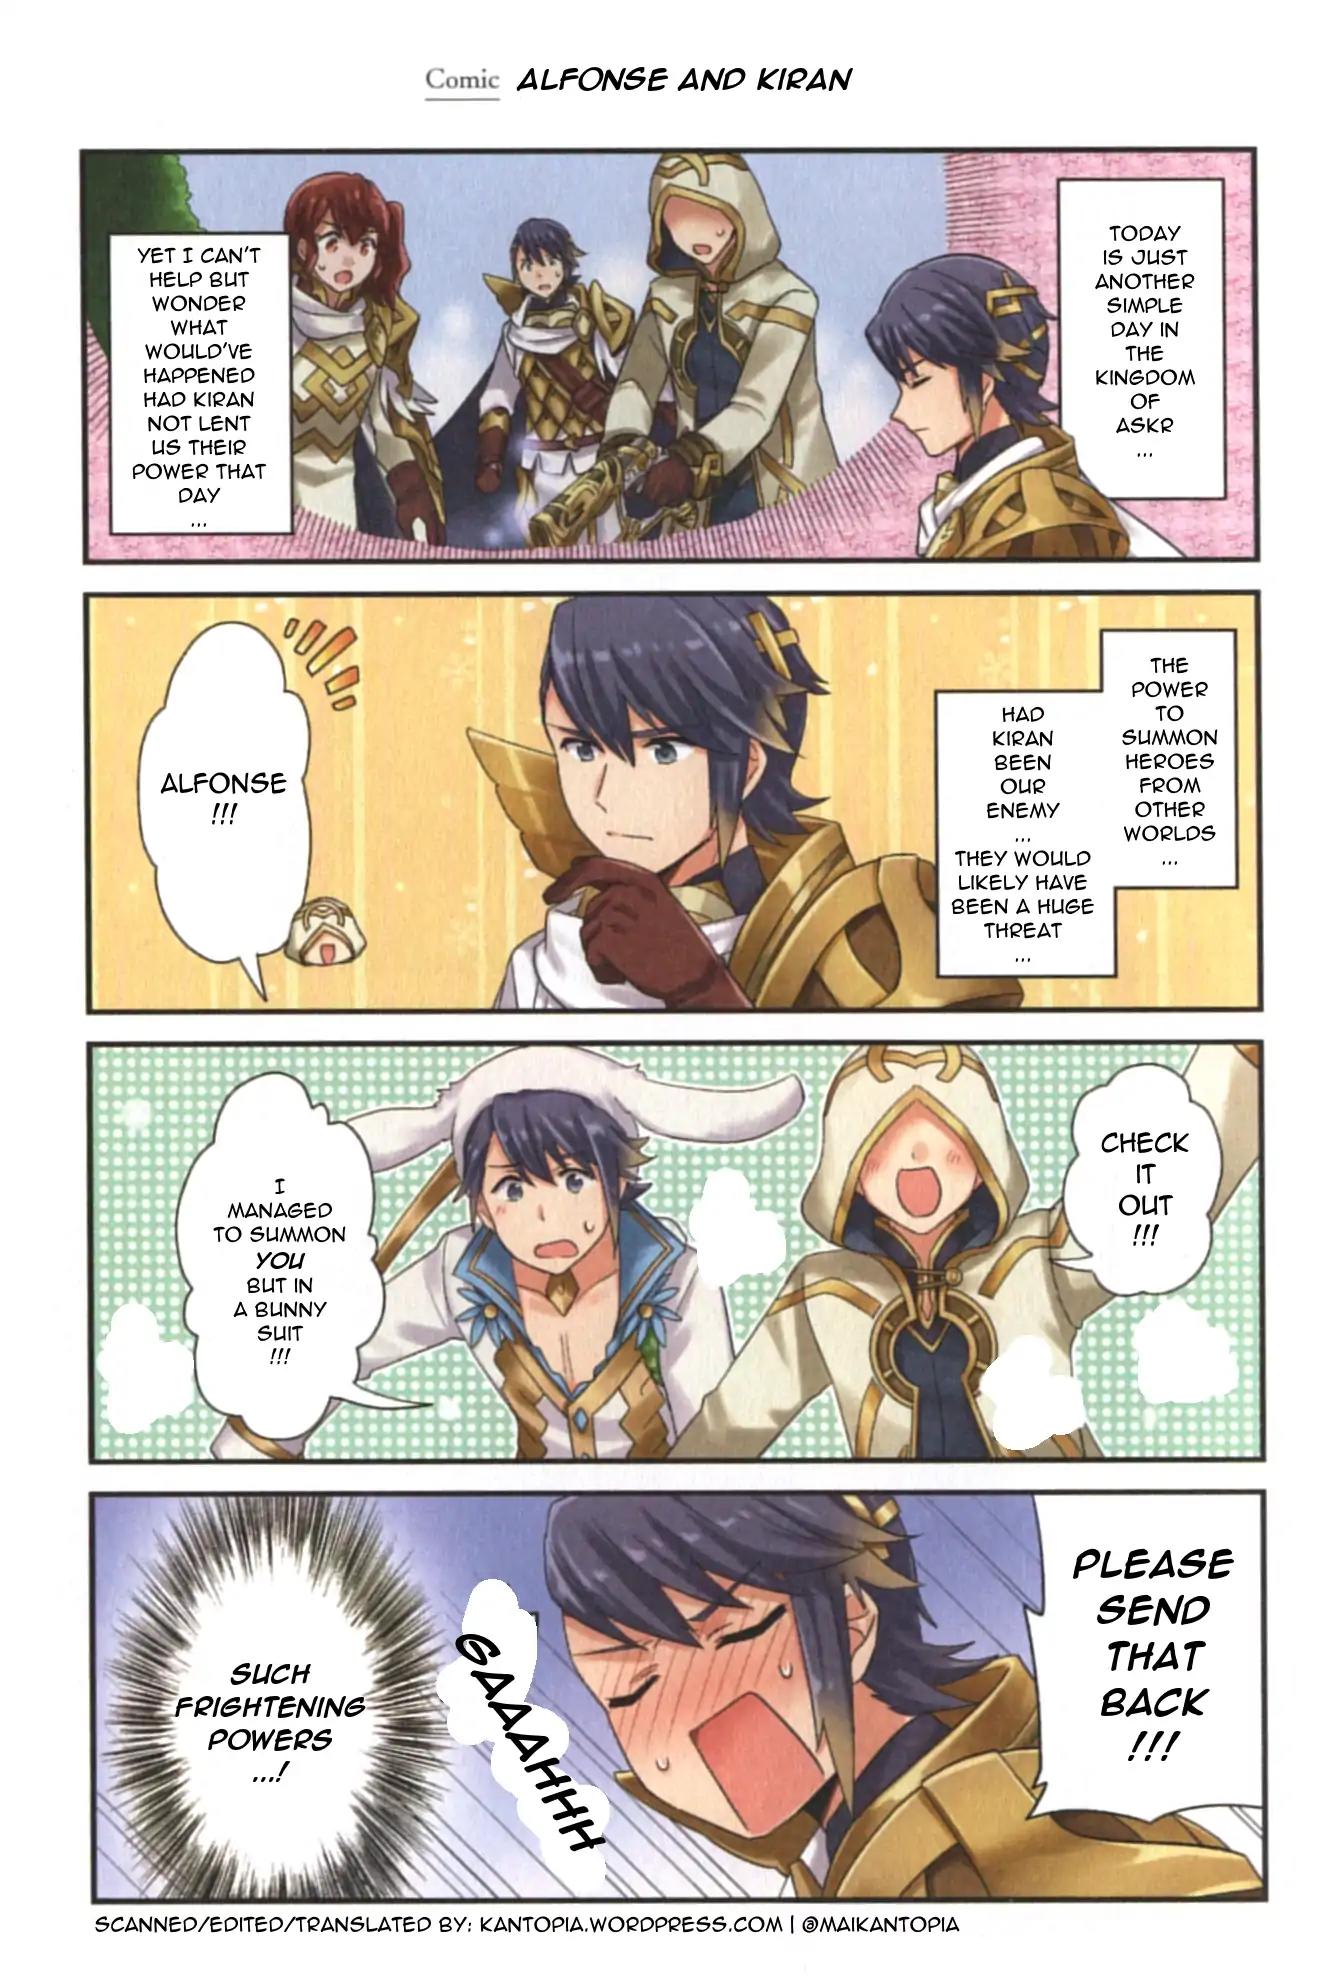 Fire Emblem Heroes Daily Lives of the Heroes Vol.1 Chapter 0.02: Character comic: